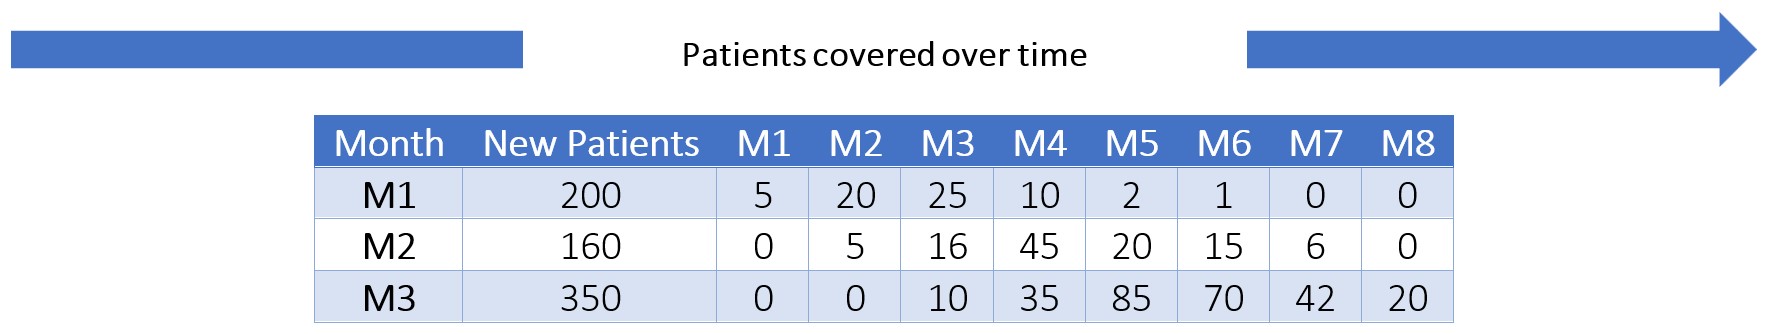 Patients-Covered-Over-Time